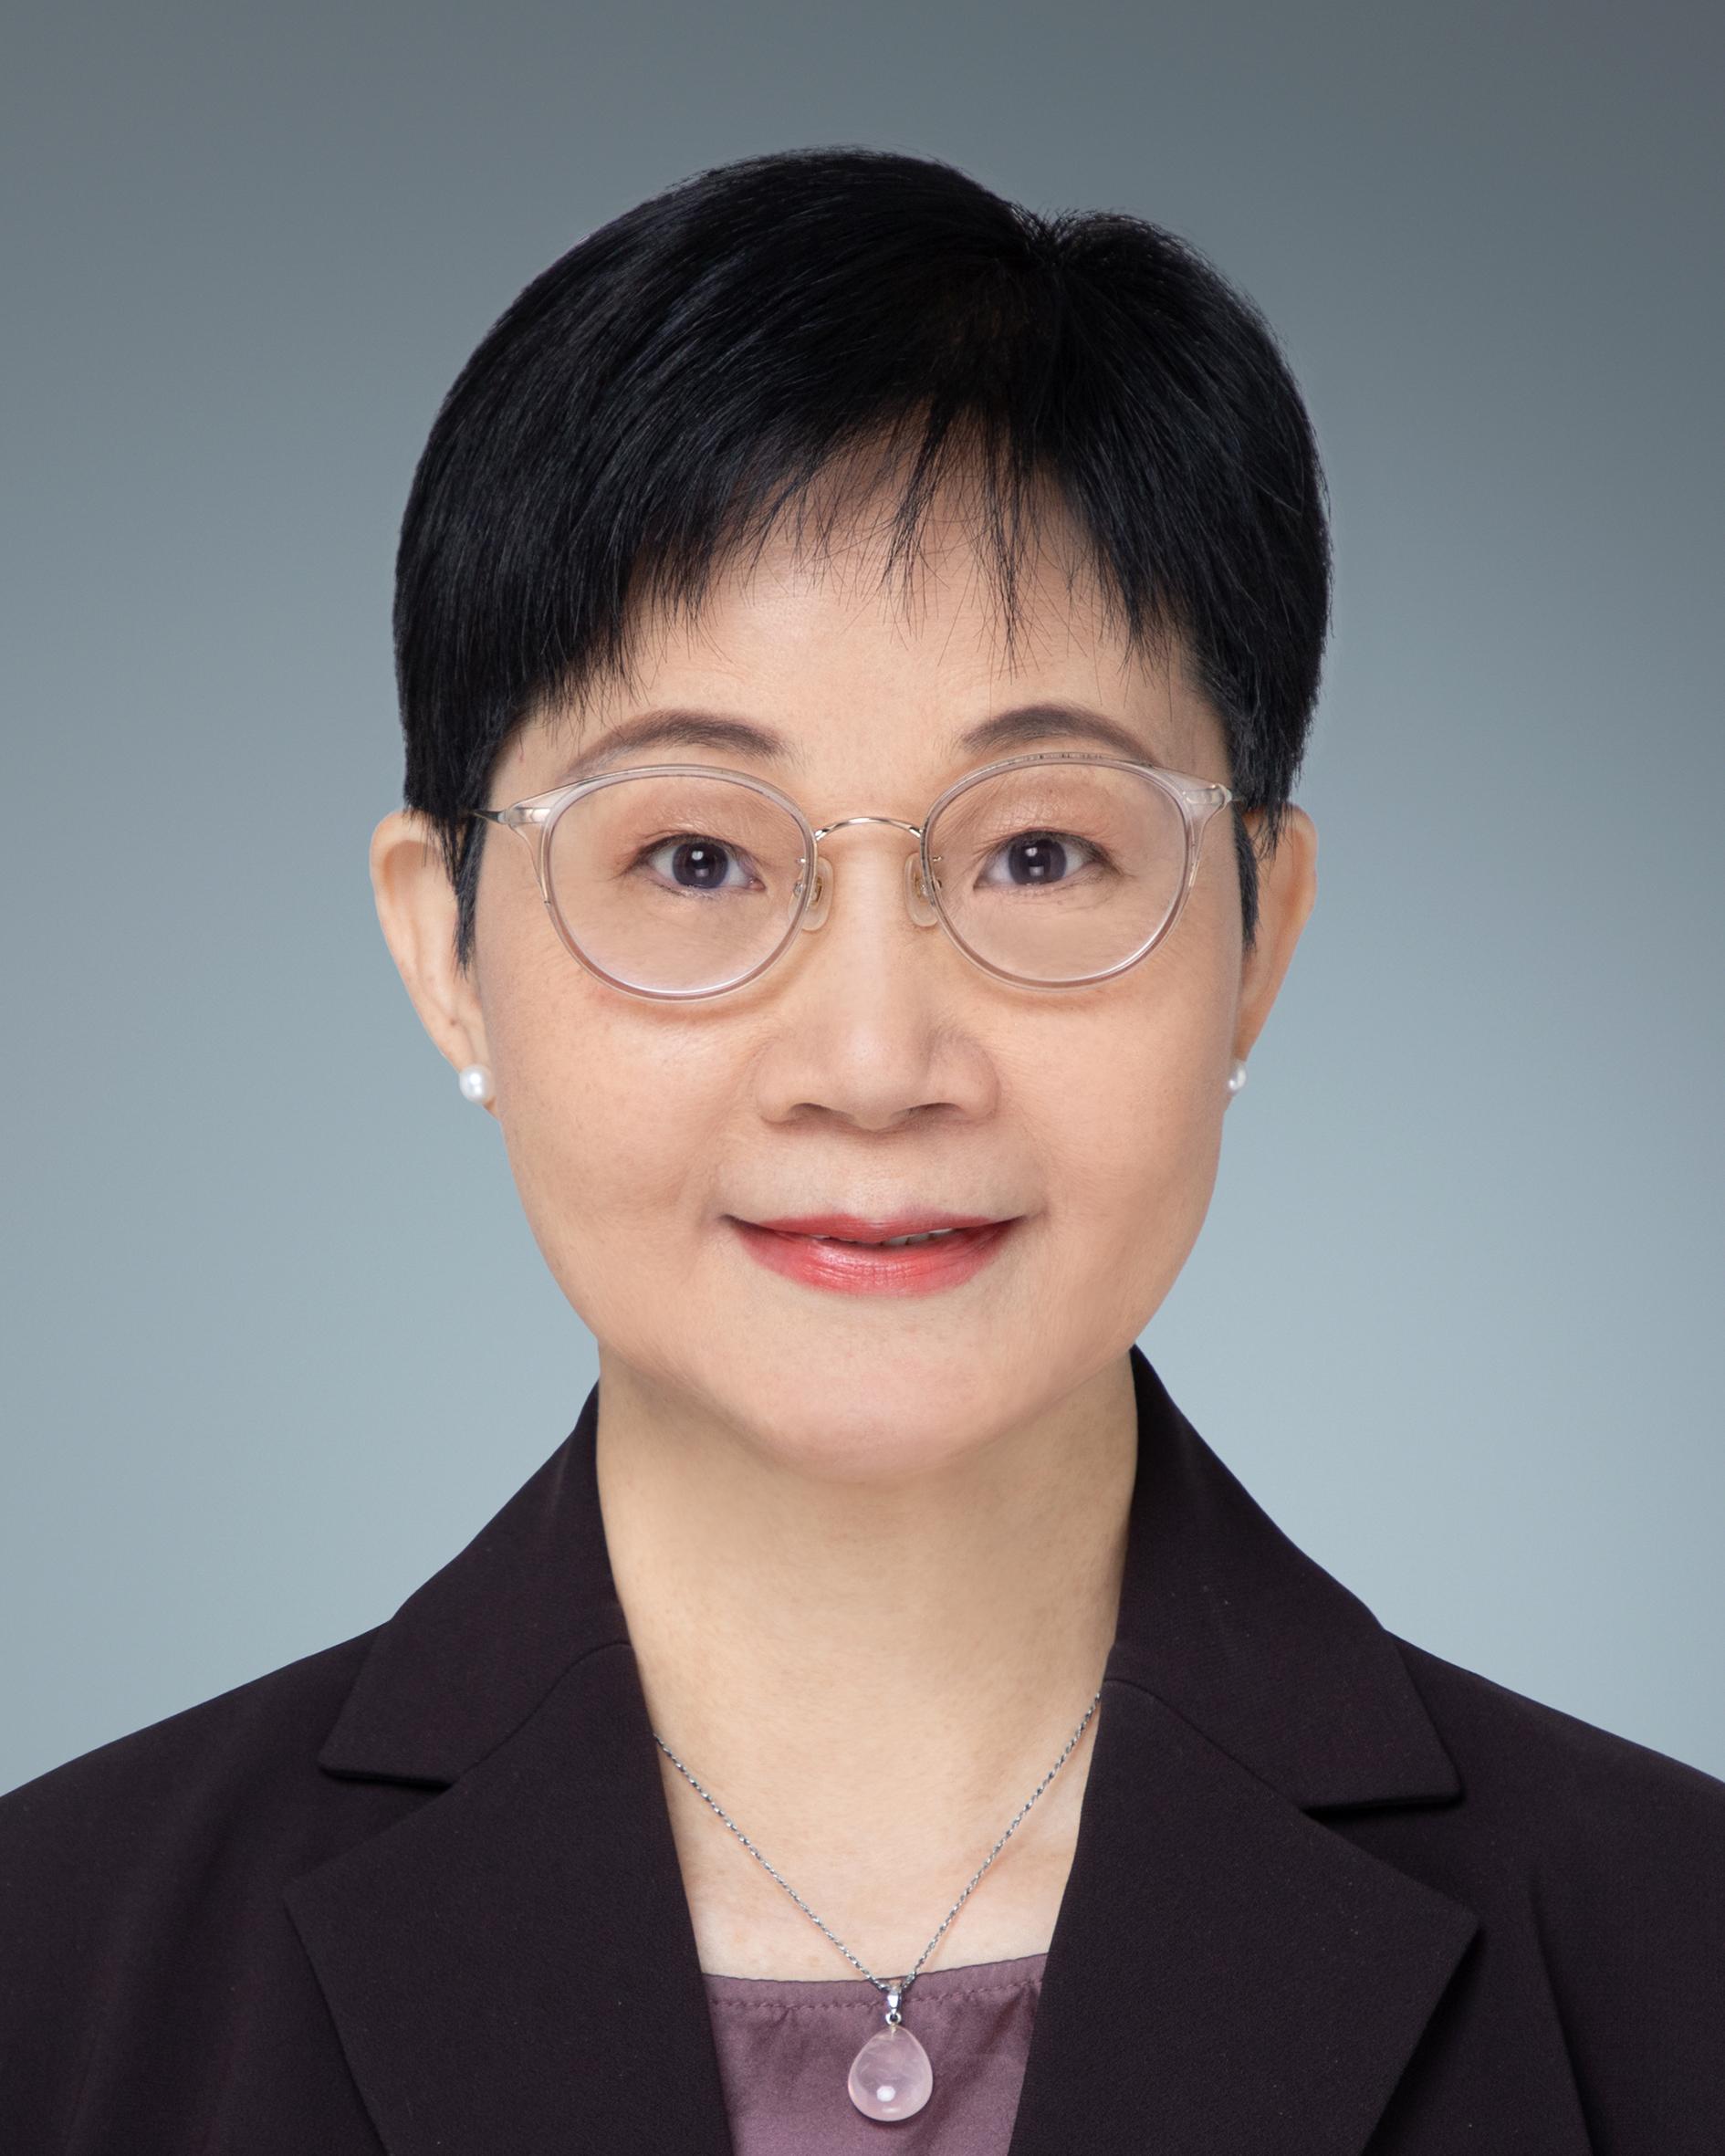 The Government announced today (March 19) that the Chief Executive has appointed Ms Linda Lam Mei-sau as the next Chairperson of the Equal Opportunities Commission in accordance with the relevant provisions of the Sex Discrimination Ordinance (Cap 480). The three-year term commences on April 11, 2024, until April 10, 2027.